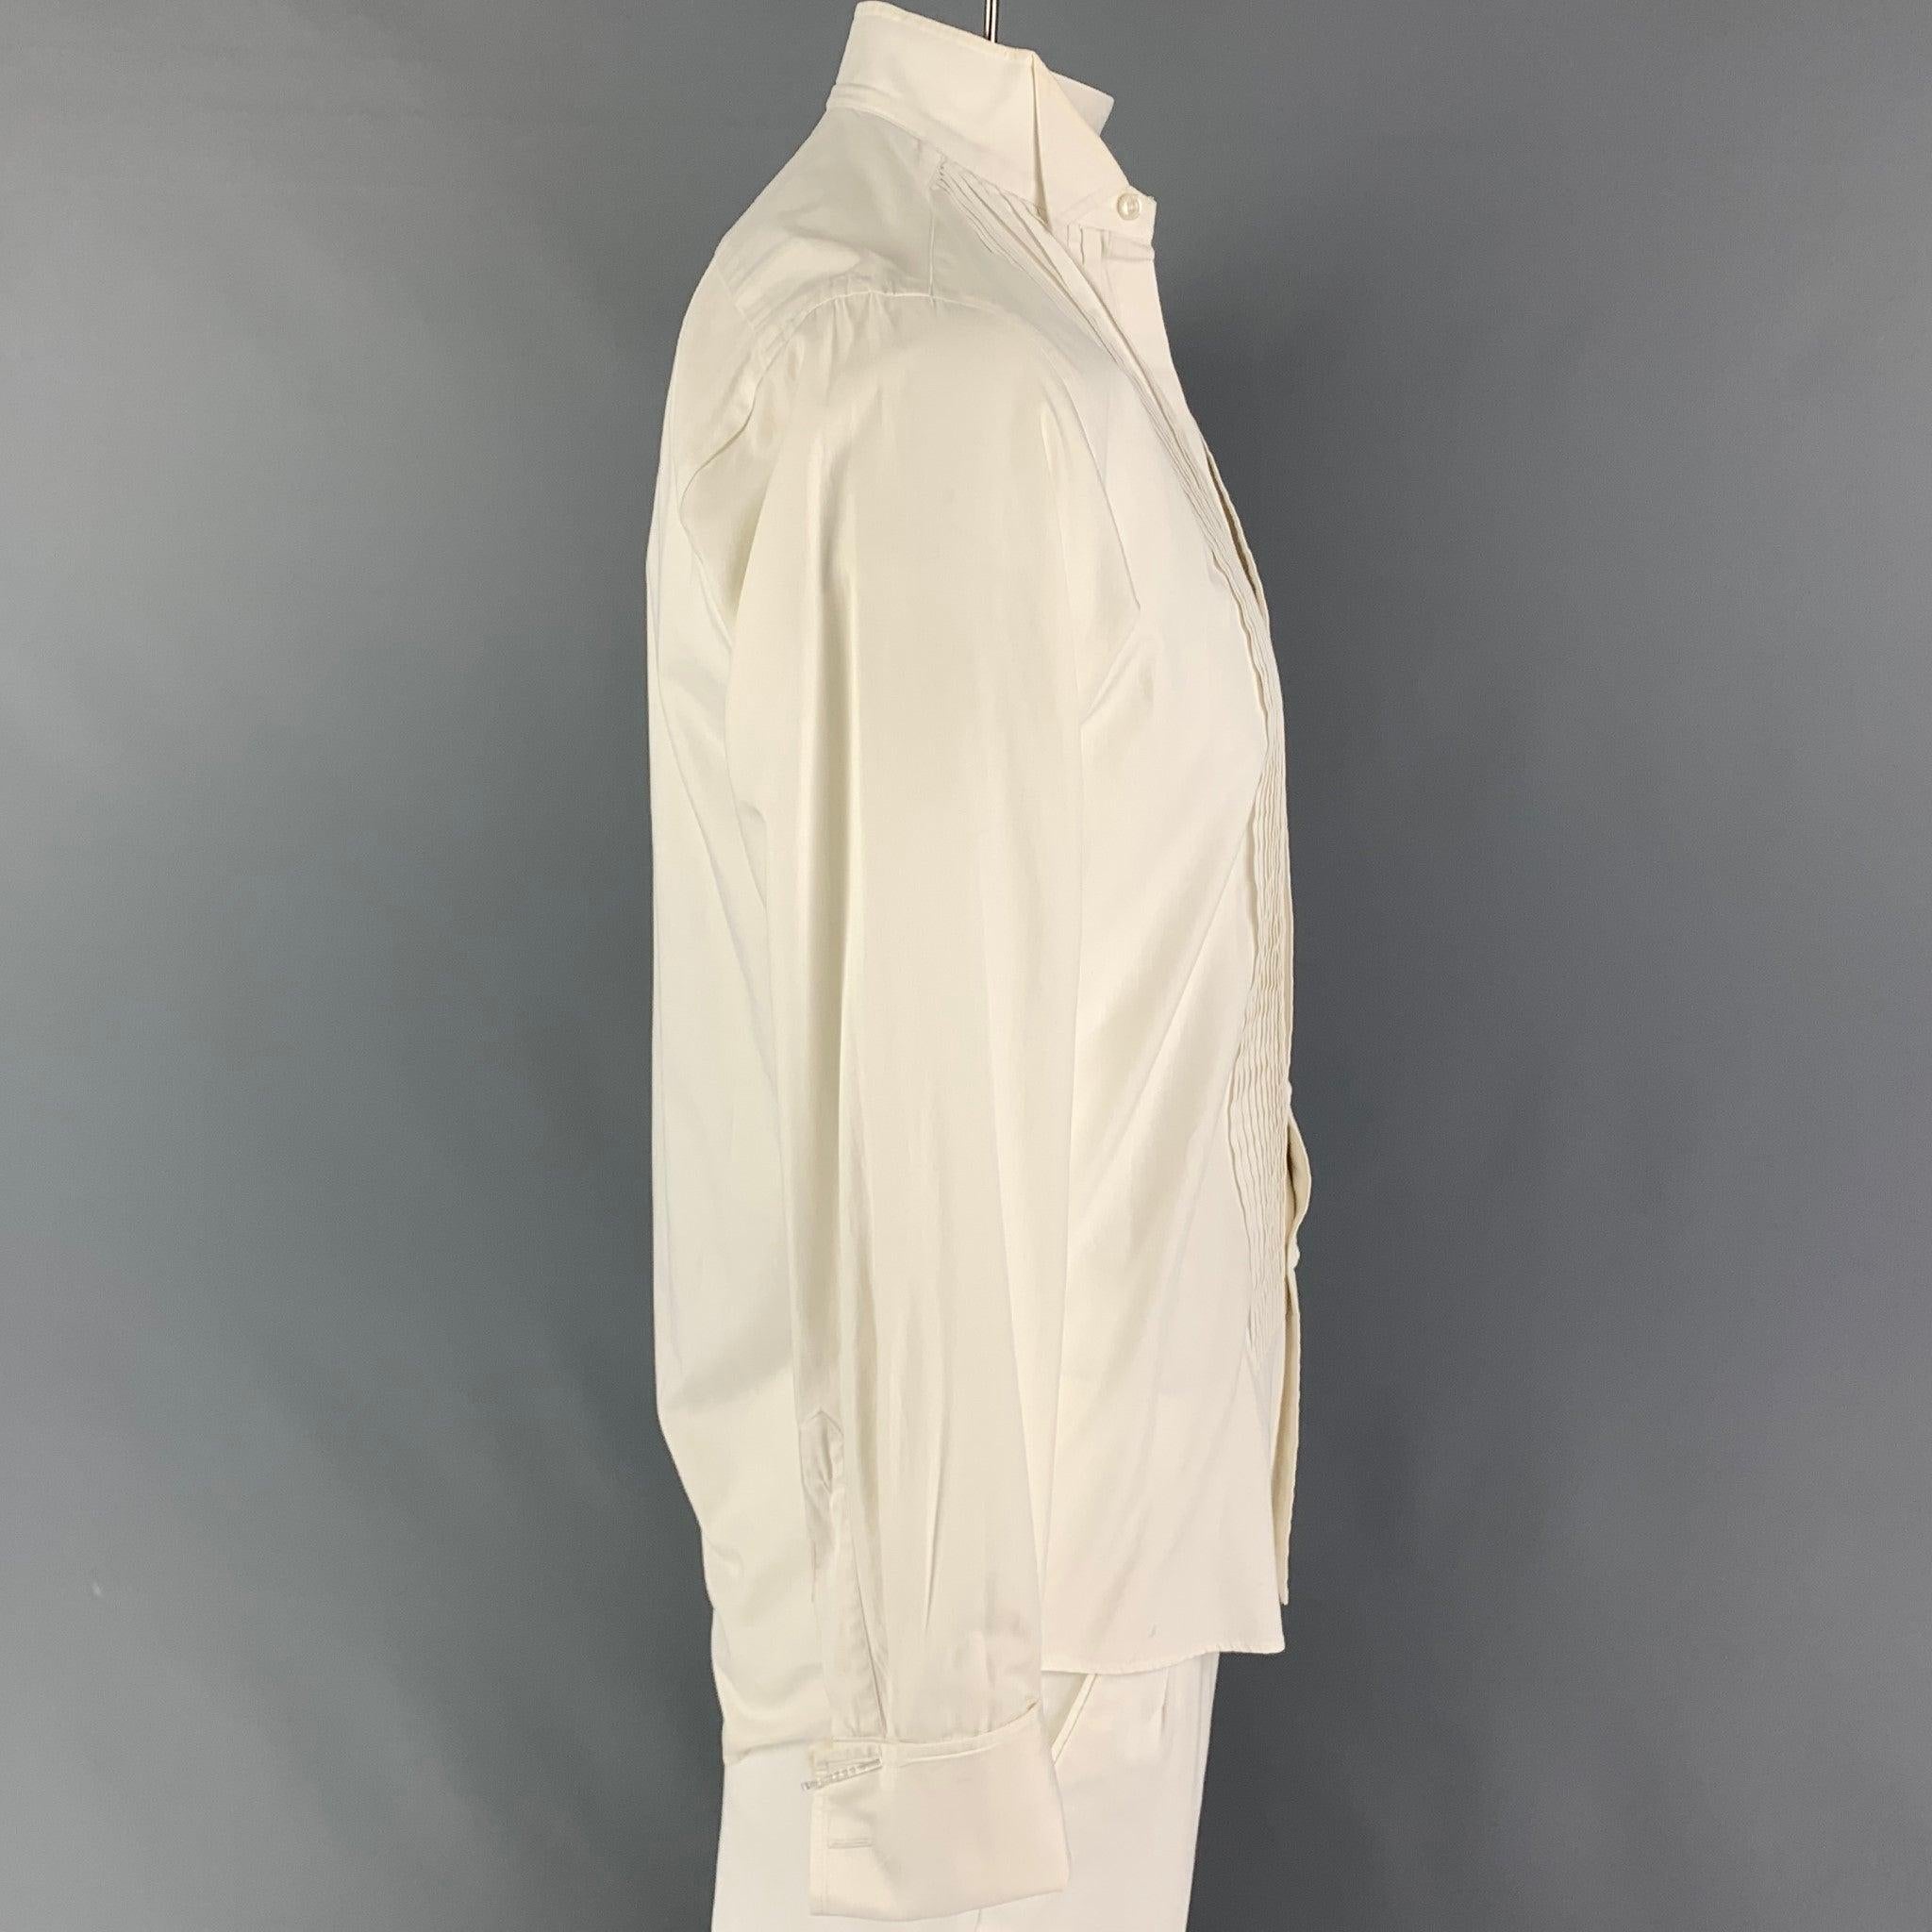 CHRISTIAN DIOR long sleeve shirt comes in a off white pleated cotton featuring a laydown collar, french cuffs, and a buttoned closure. Cufflinks are not included. Made in USA.
 Good
 Pre-Owned Condition. Missing buttons. Minor wear.  
 

 Marked: 